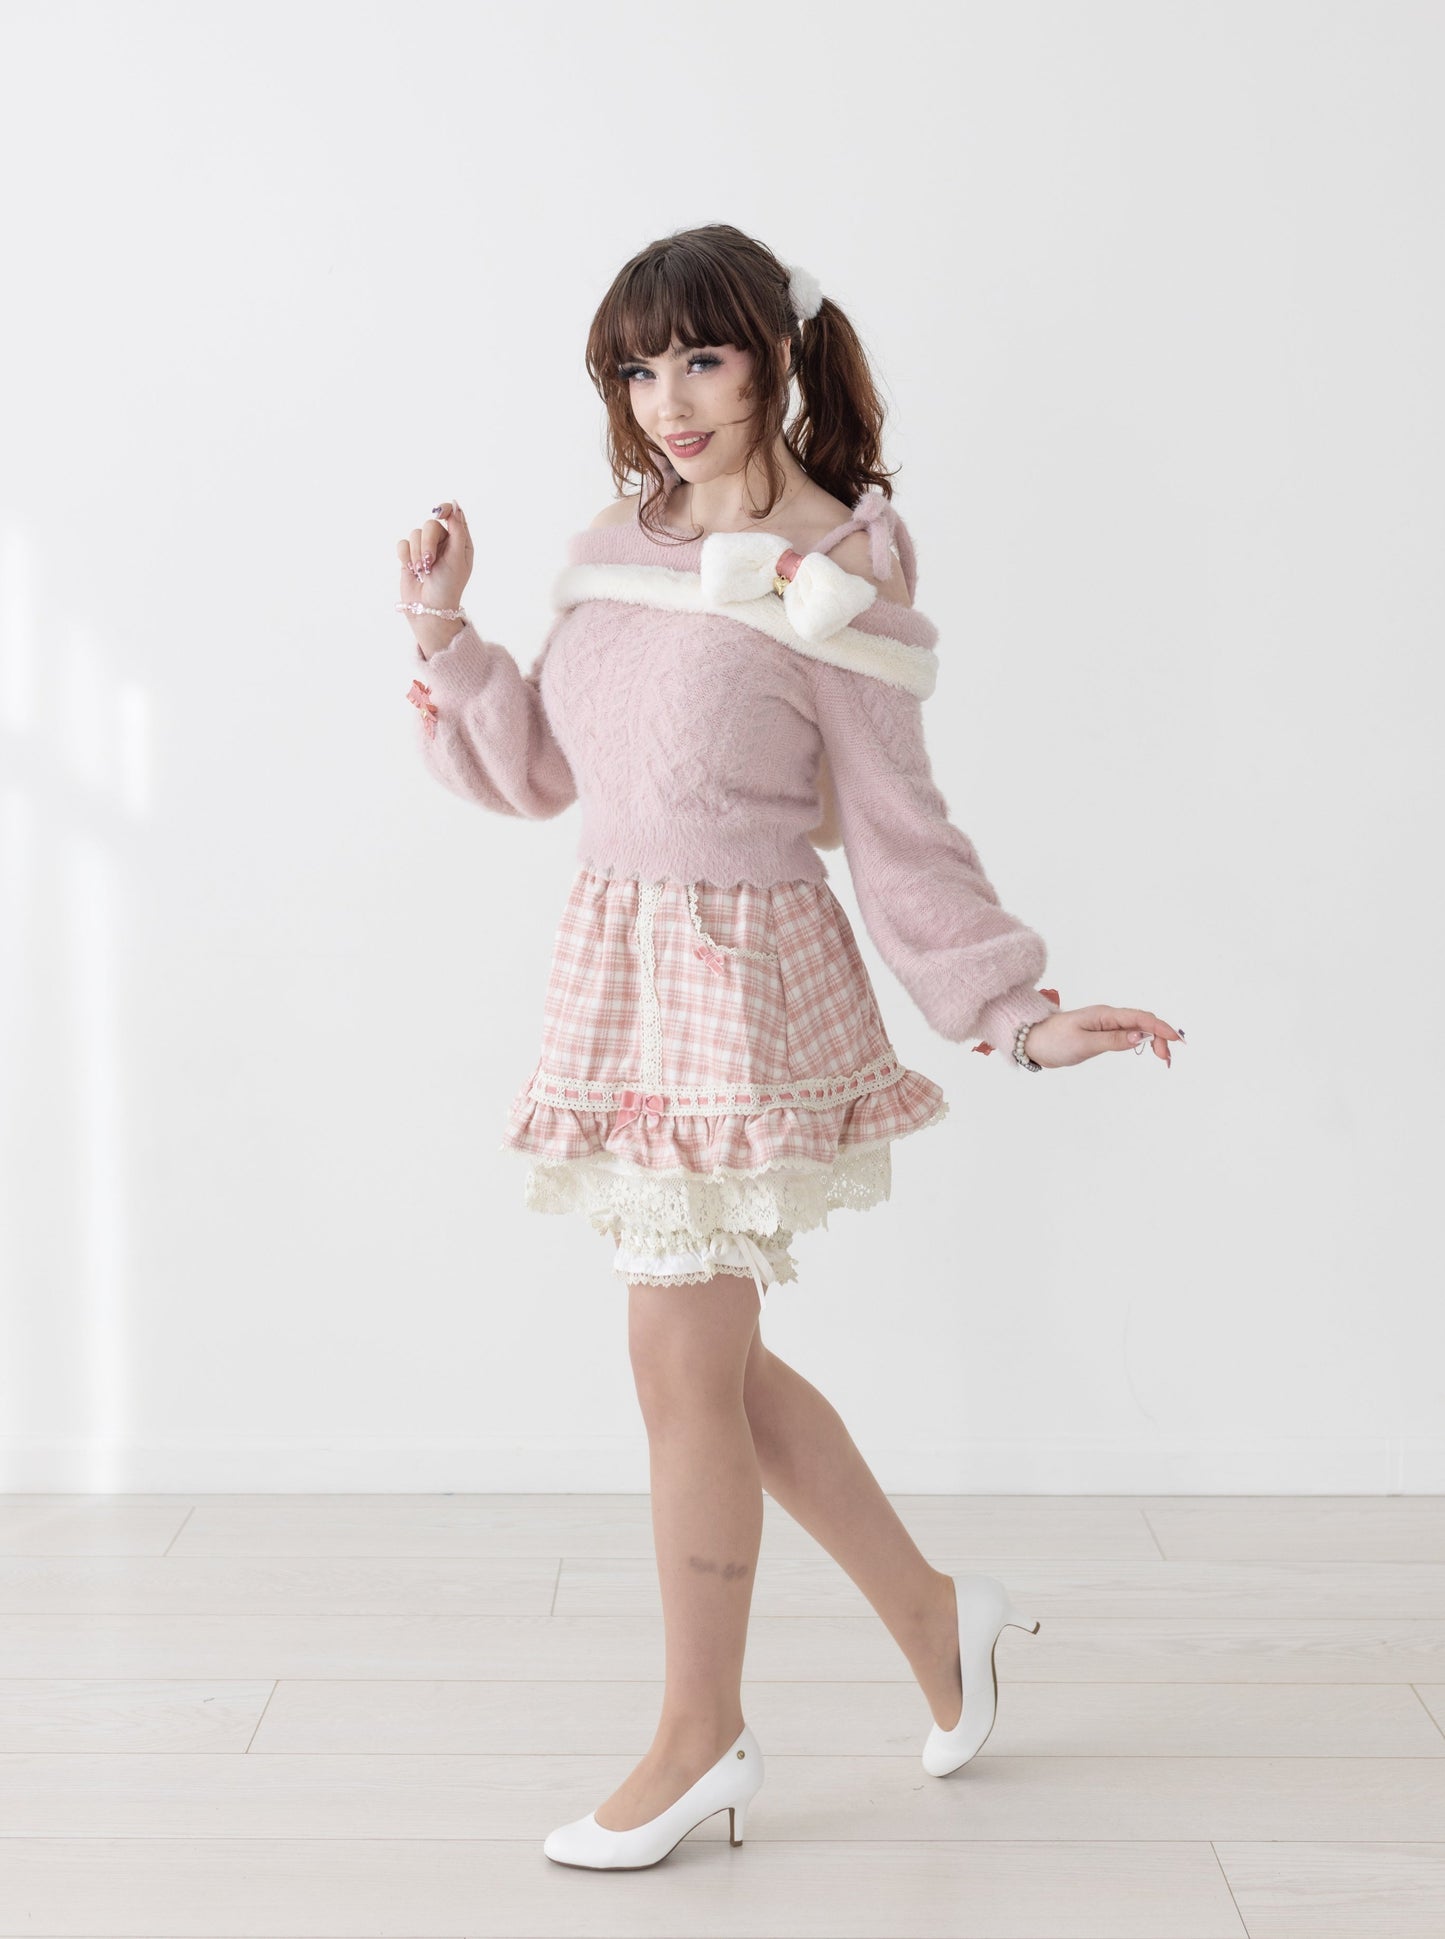 Plaid skort with attached bloomers